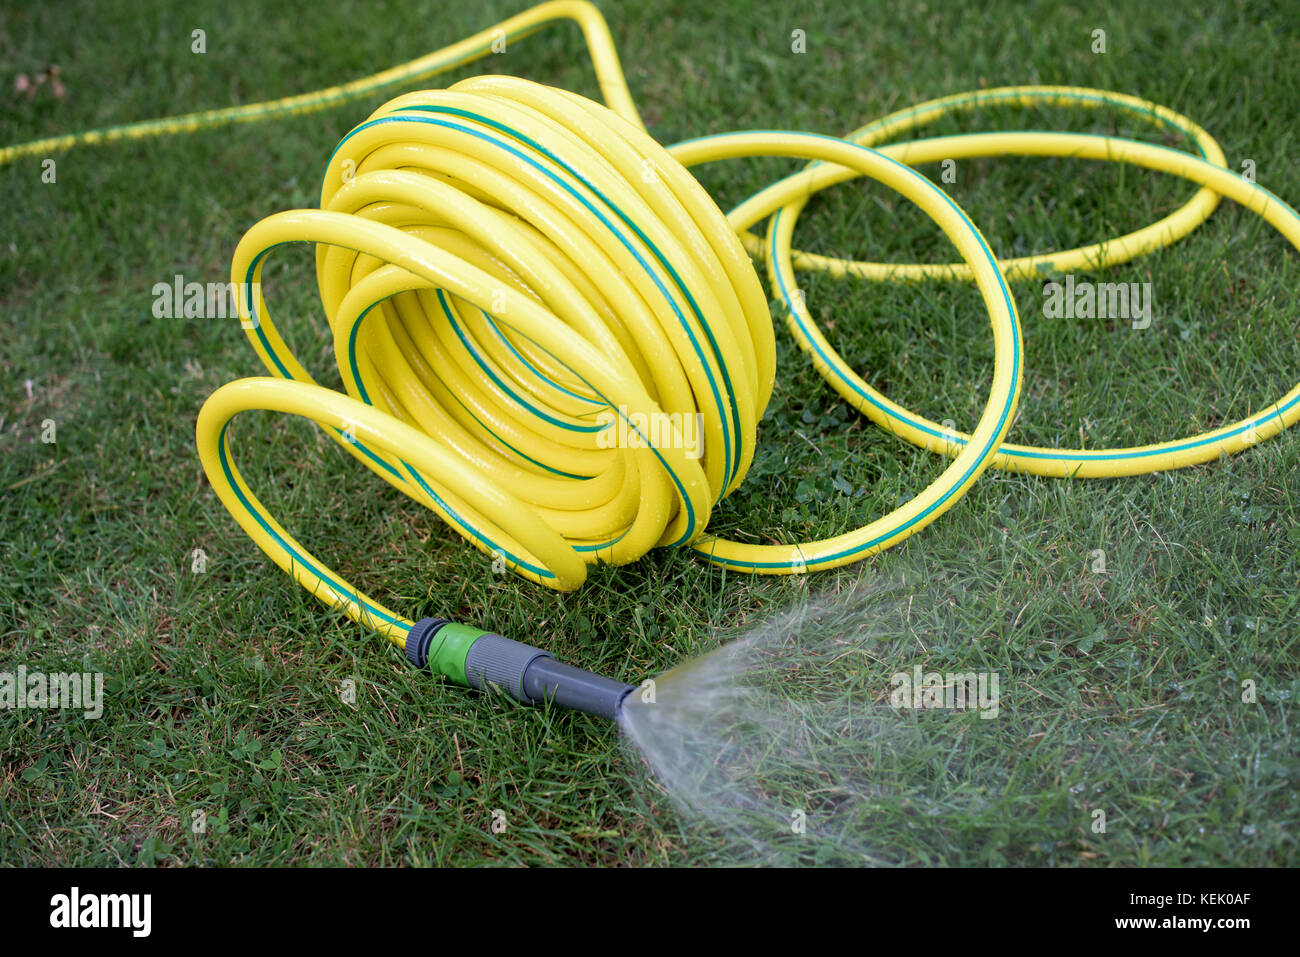 Yellow plastic hose pipe in the garden Stock Photo